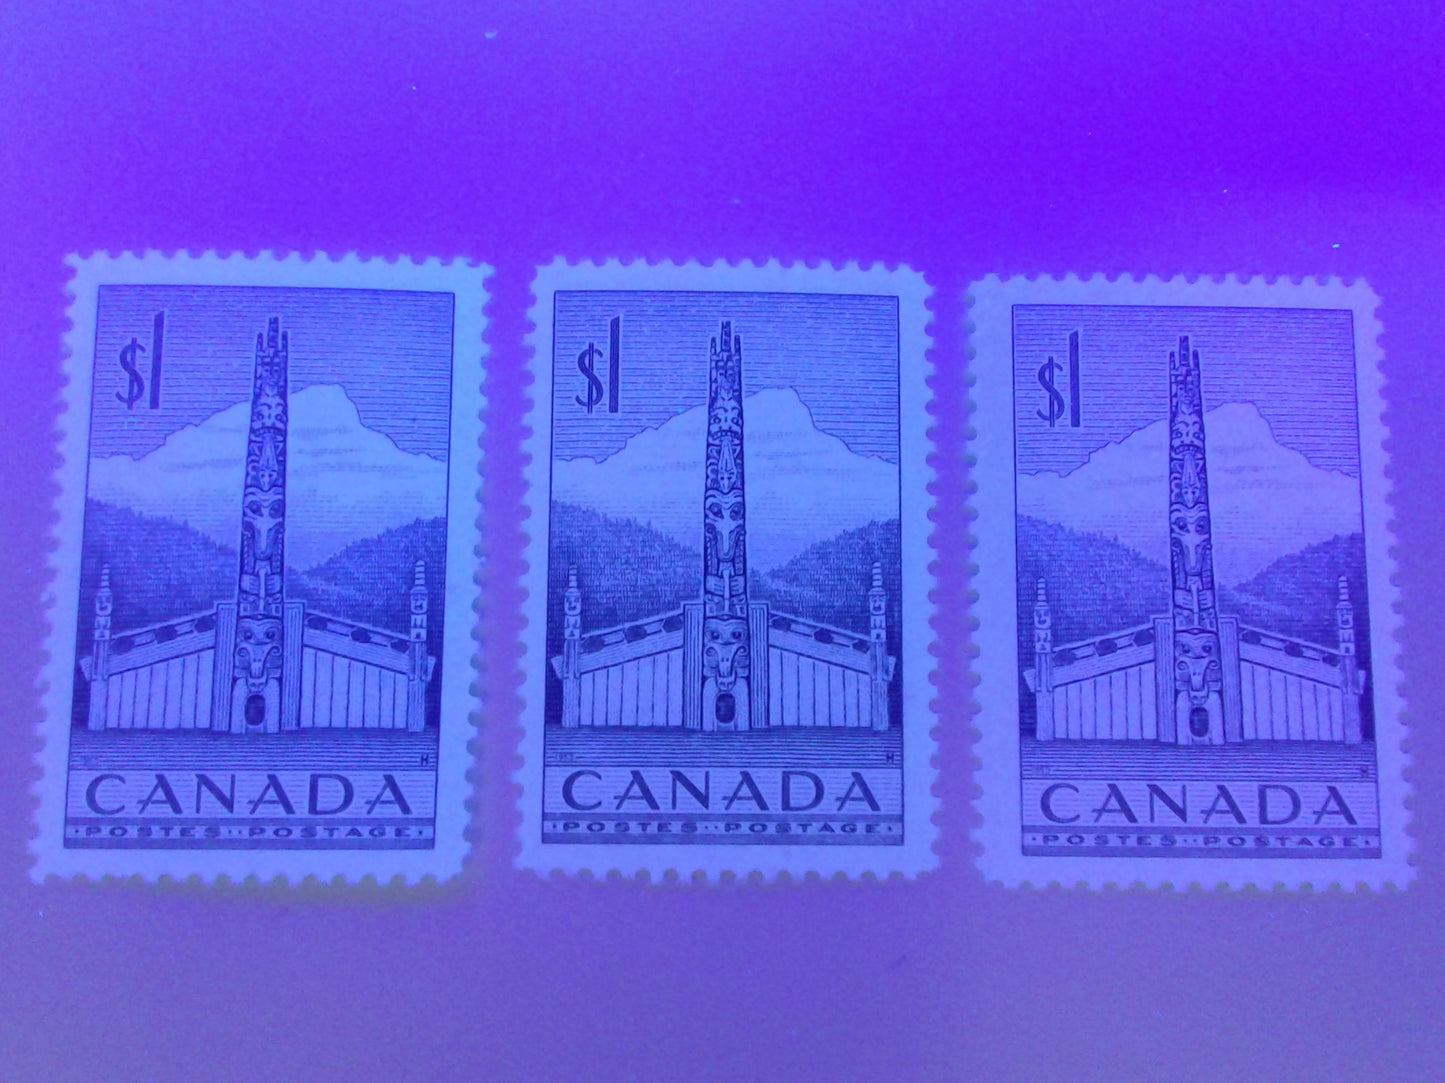 Canada #321 $1 Deep Grey Pacific Coast Totem Pole, 1953-1962 Karsh and Wilding Issue, Very Fine CDS Used Block of 4, DF Gr Ribbed Paper, Perf 12